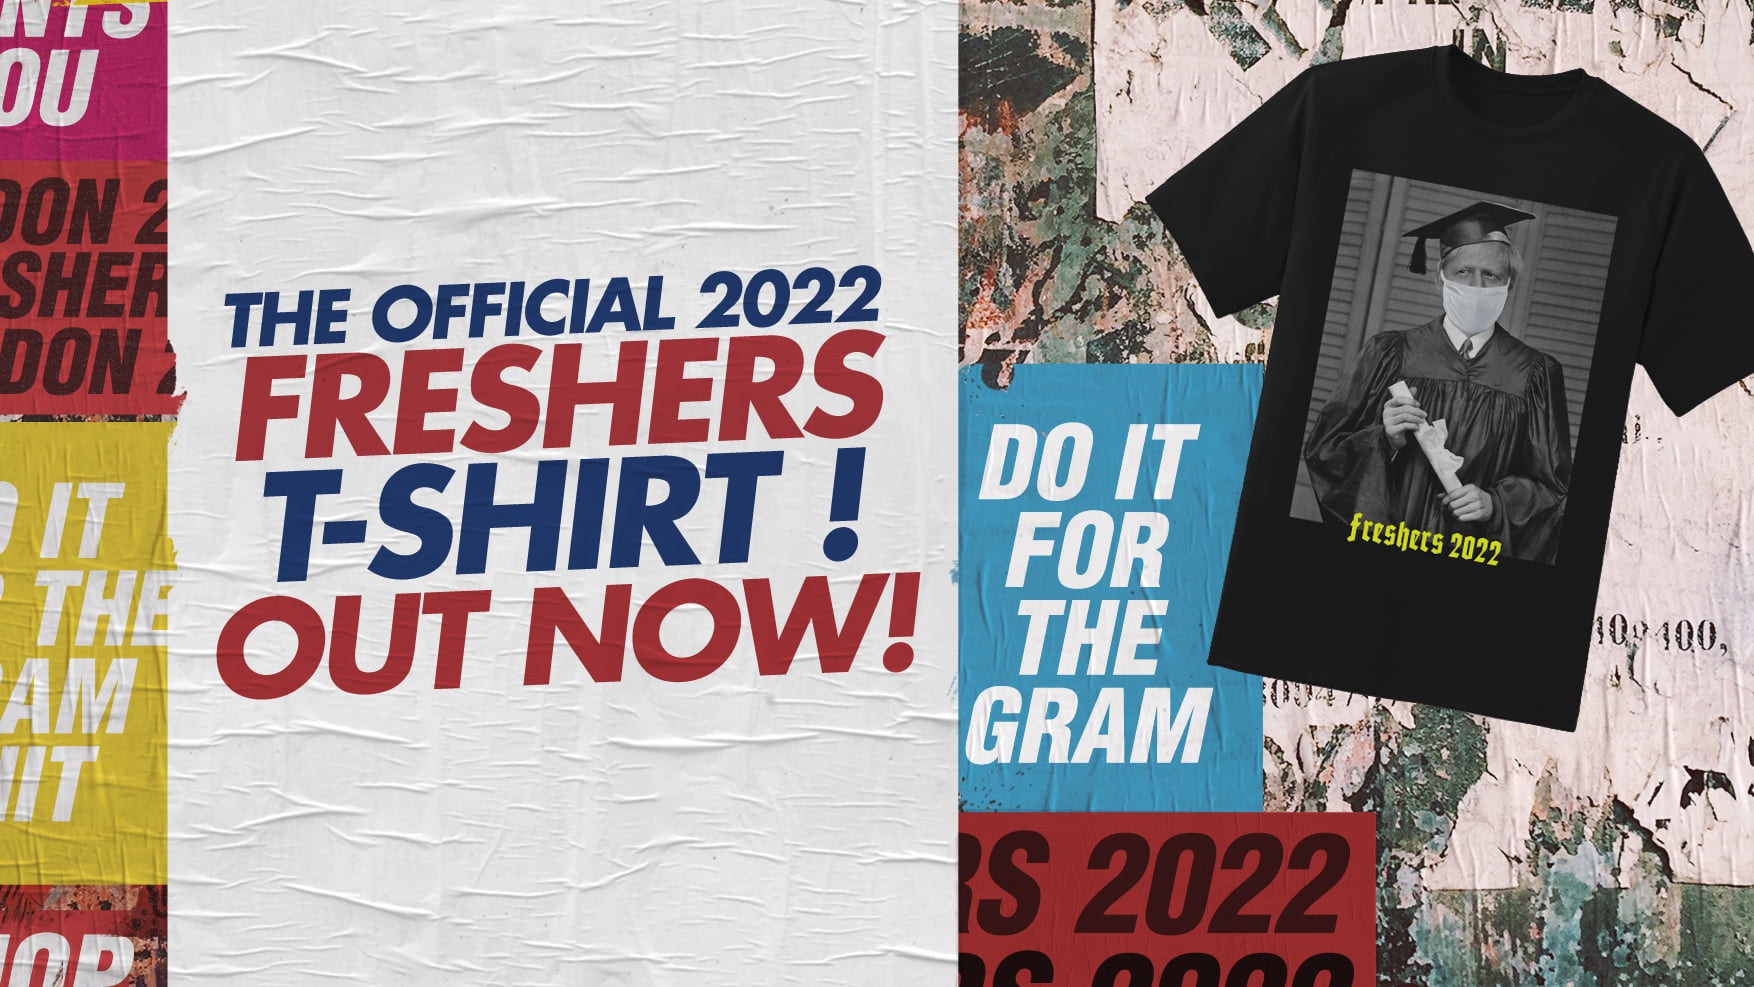 The London Freshers T-Shirt 2022 – Purchase Yours Now!